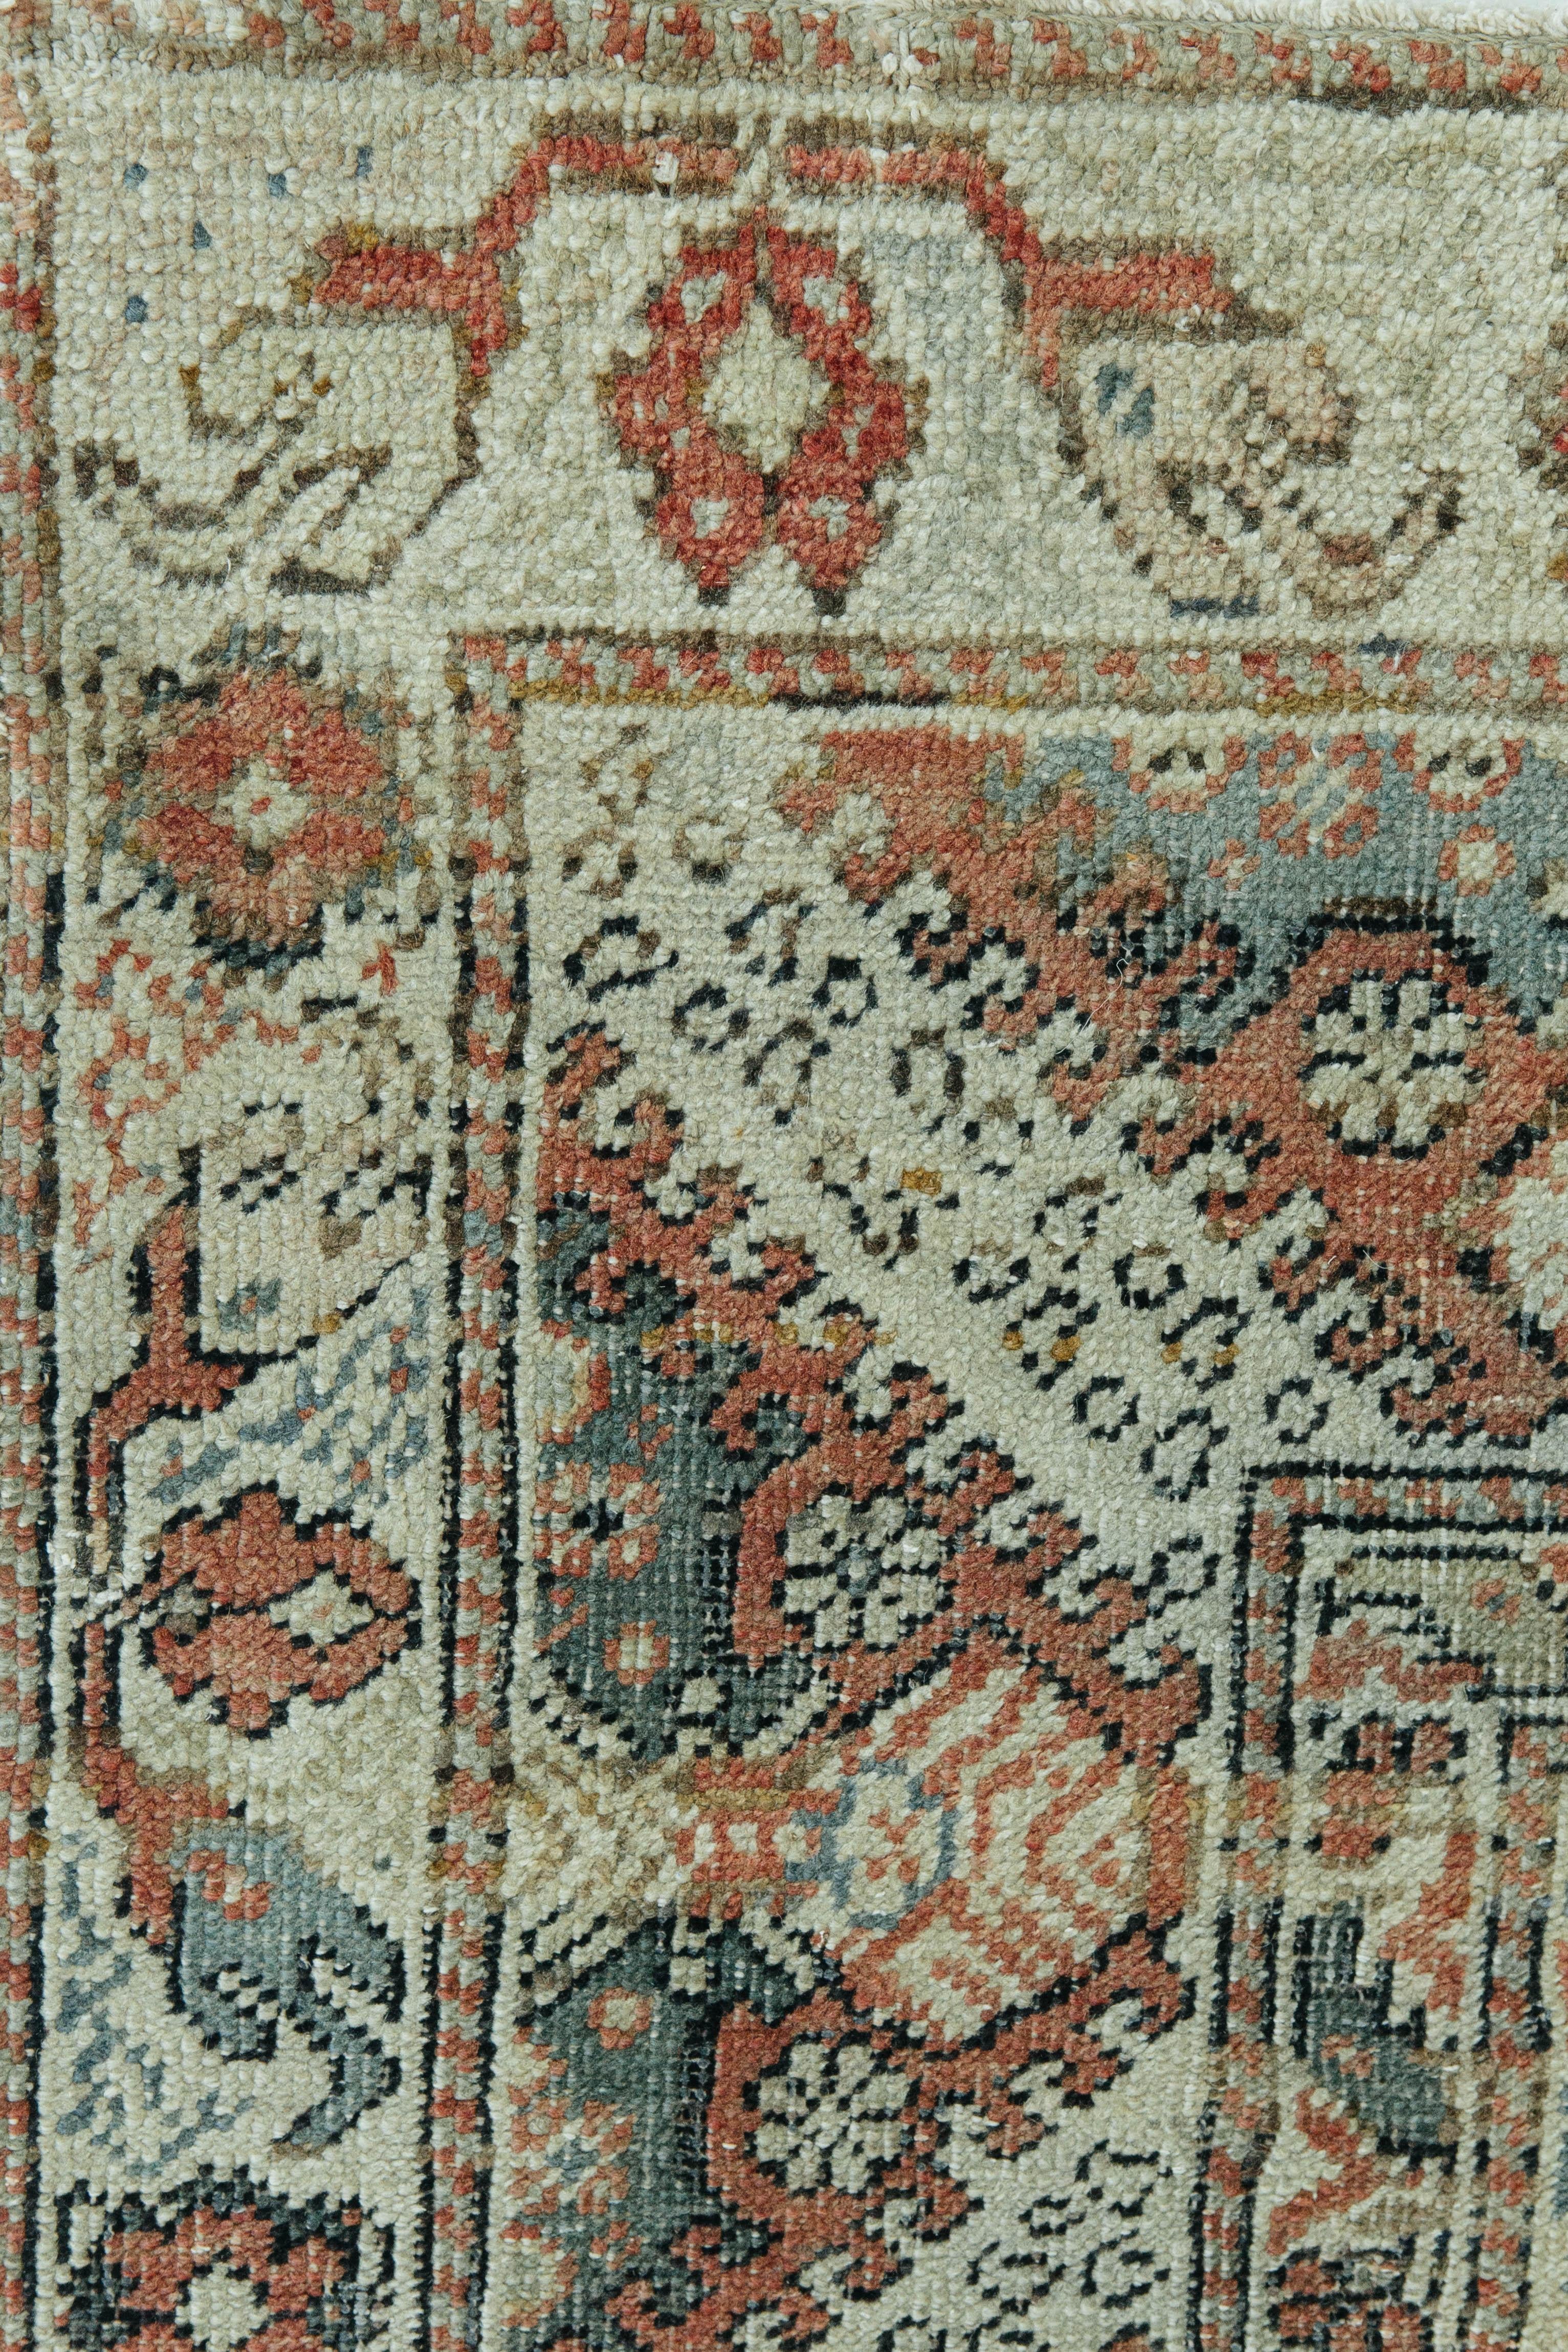 An exquisite vintage Turkish Anatolian rug that will leave lasting impressions. This piece showcases traditional Anatolian designs including the central medallion and the geometric and symmetric patterning of floral scrolls. Vintage Turkish